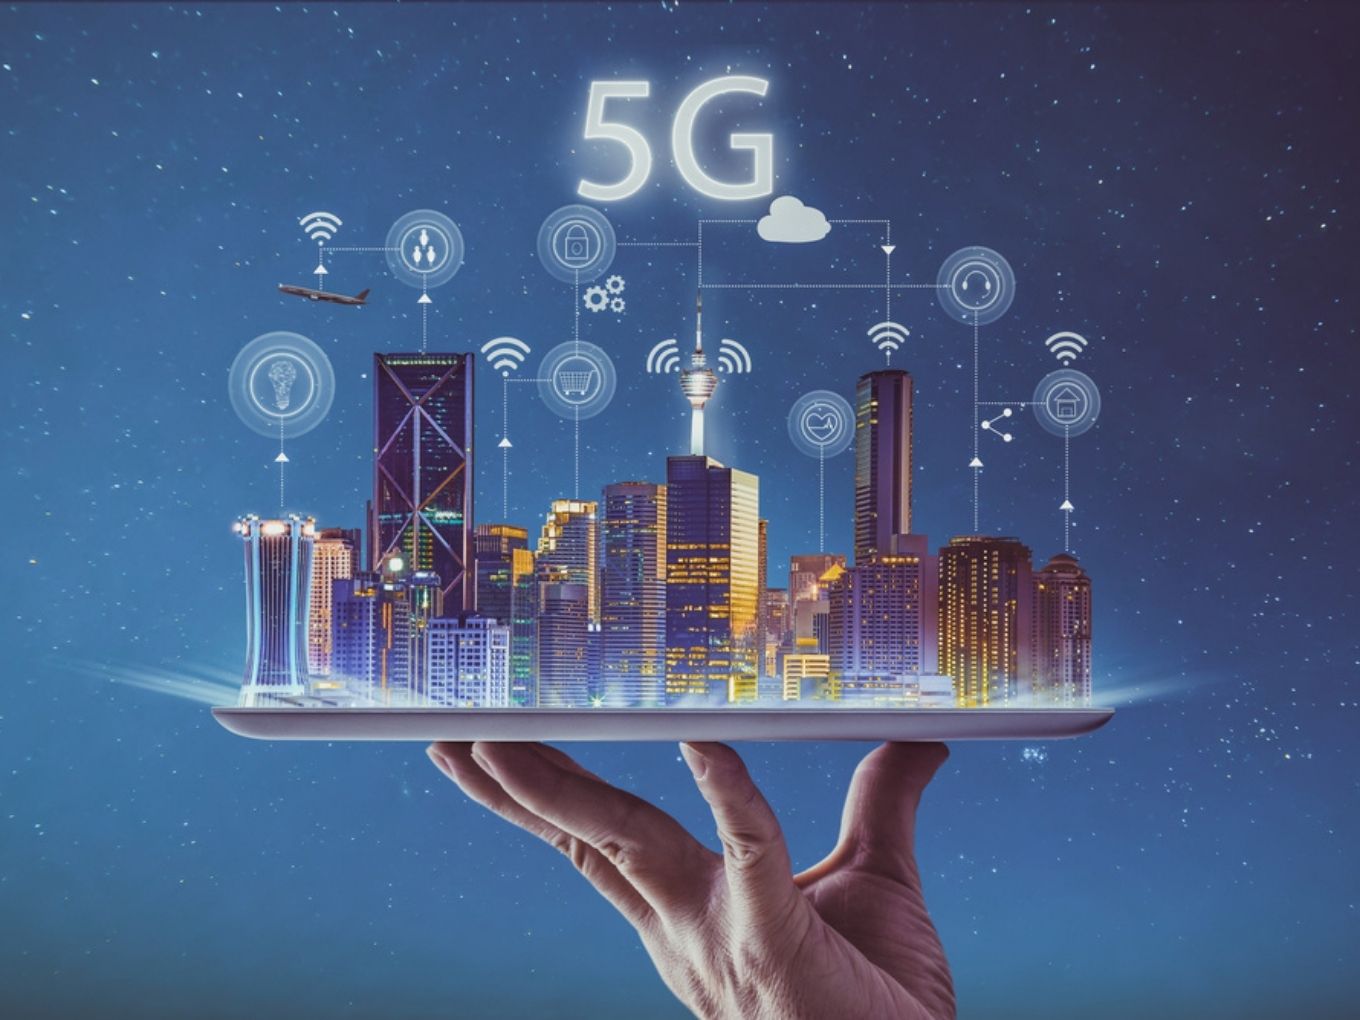 Govt Gives Green Light To 5G Trials In India; No Chinese OEMs Allowed